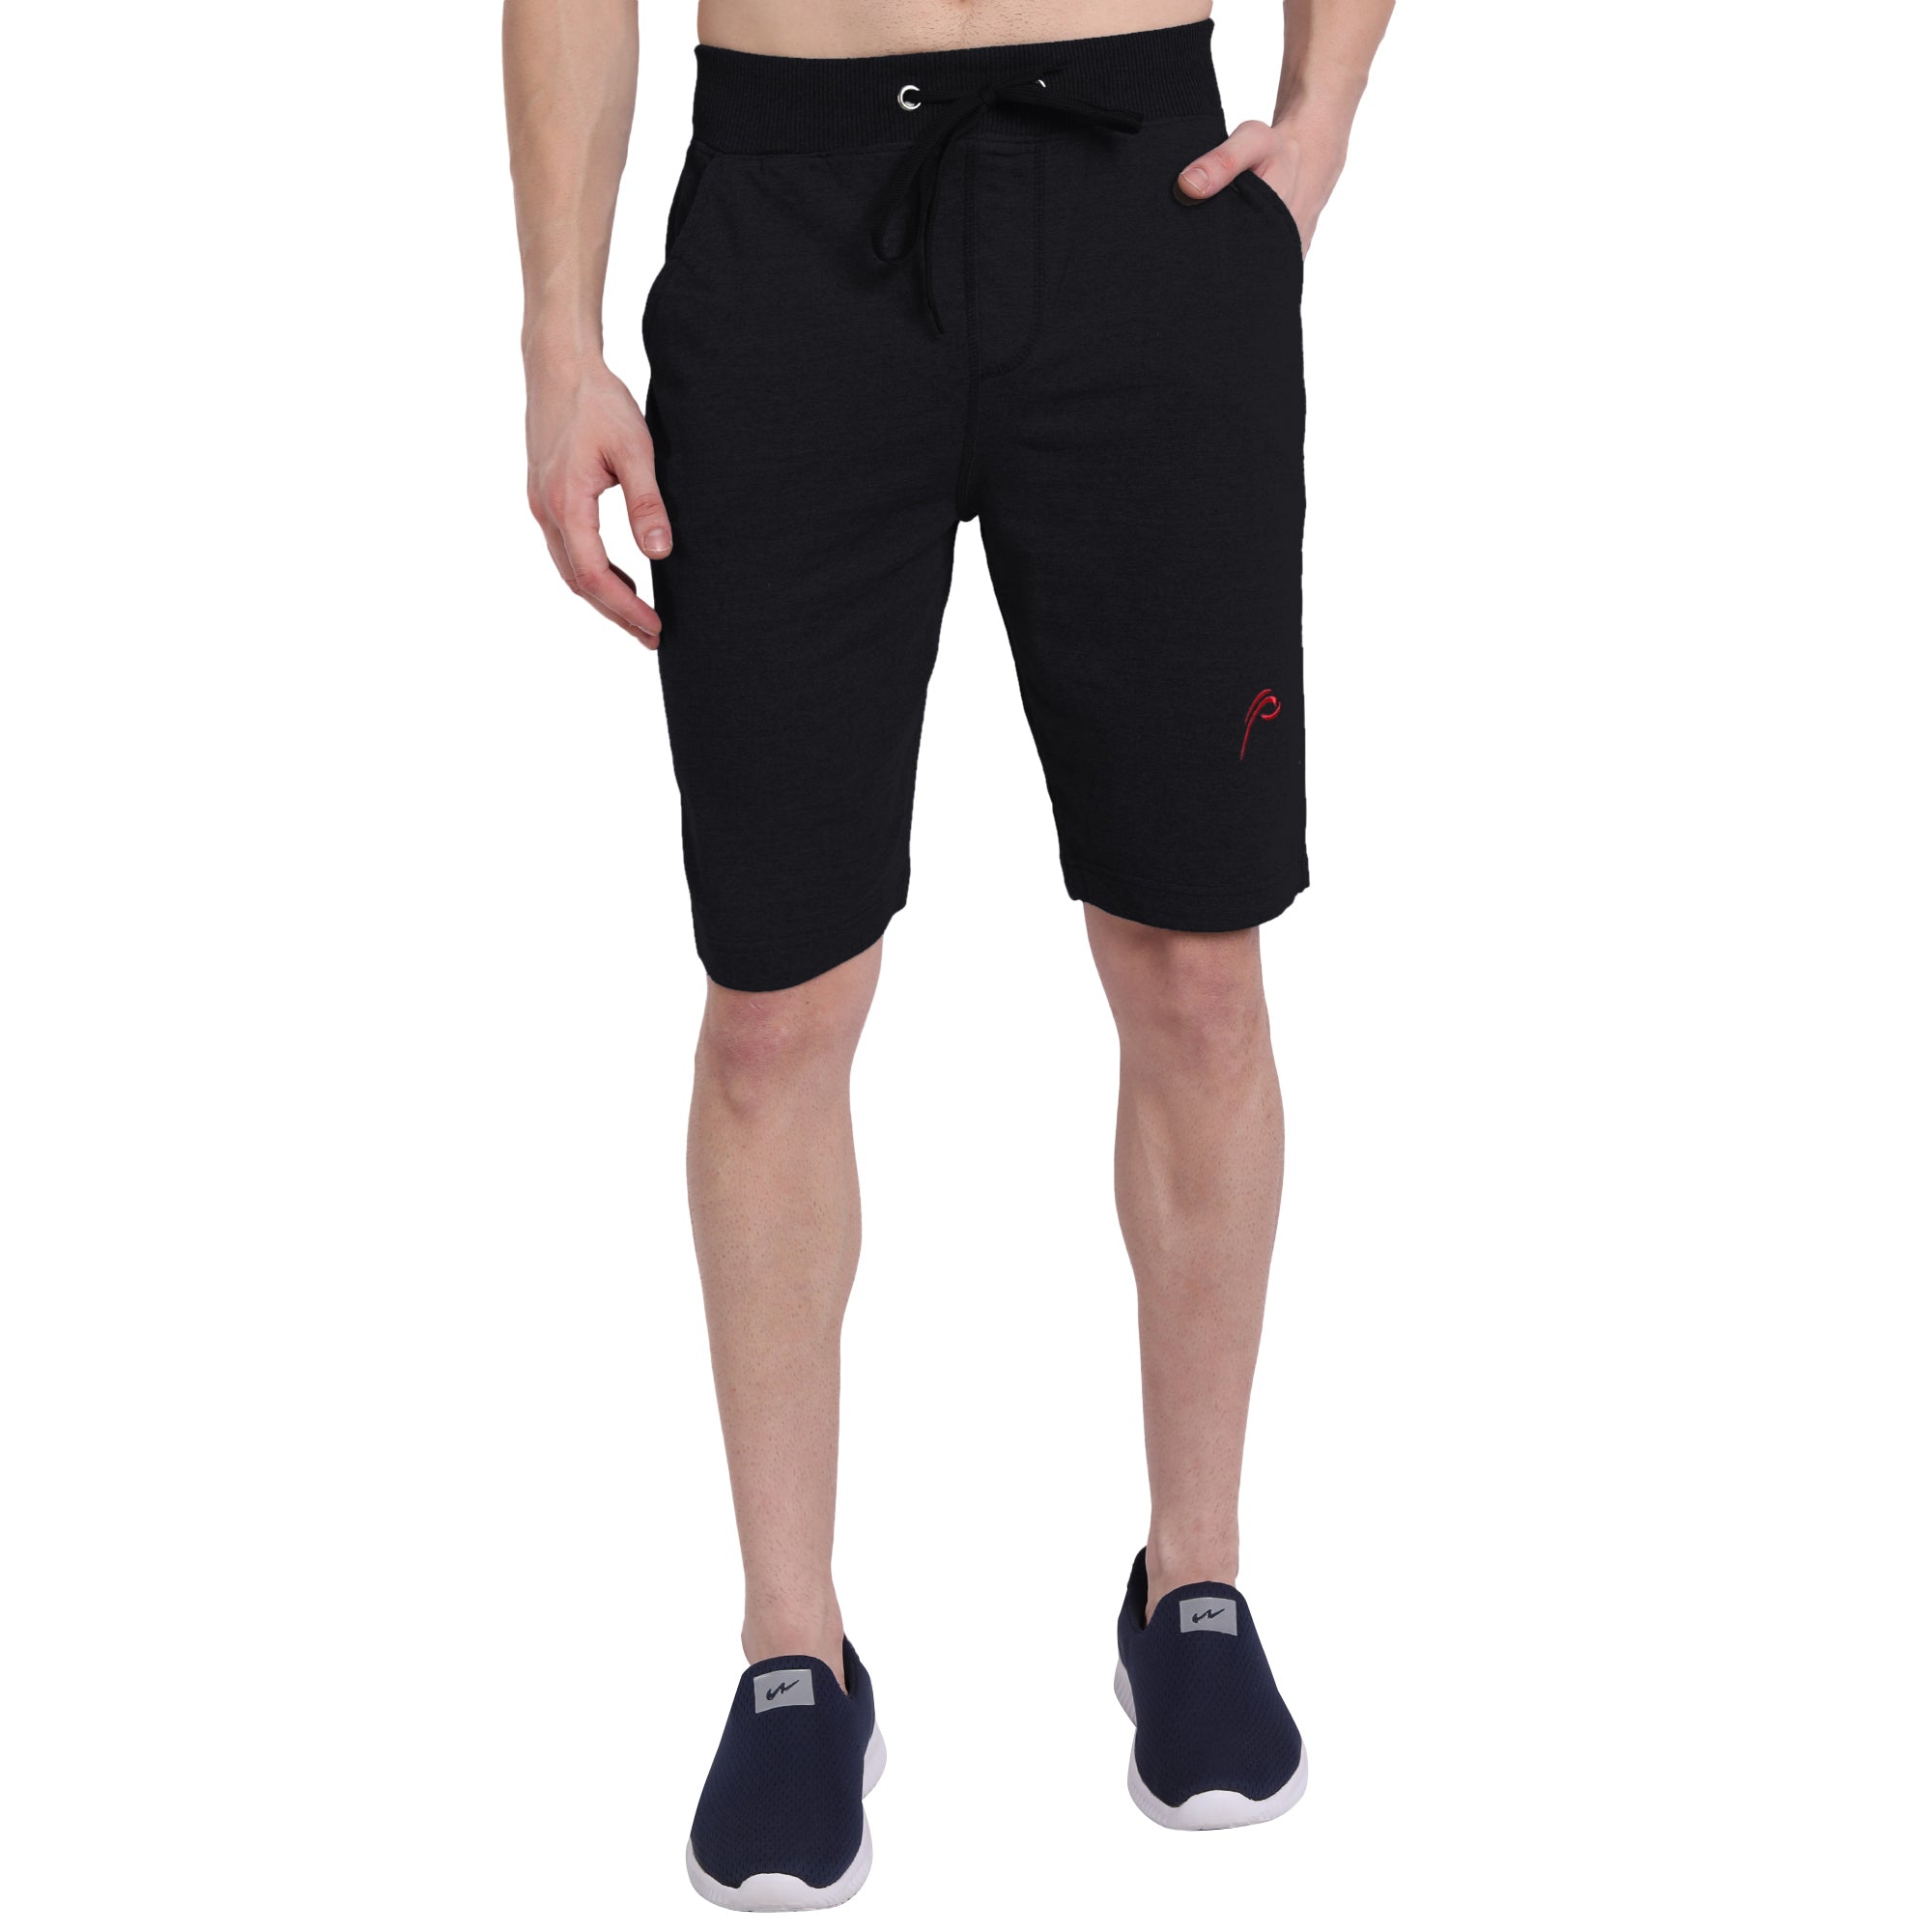 Casual 3 4 Shorts - Buy Casual 3 4 Shorts online in India